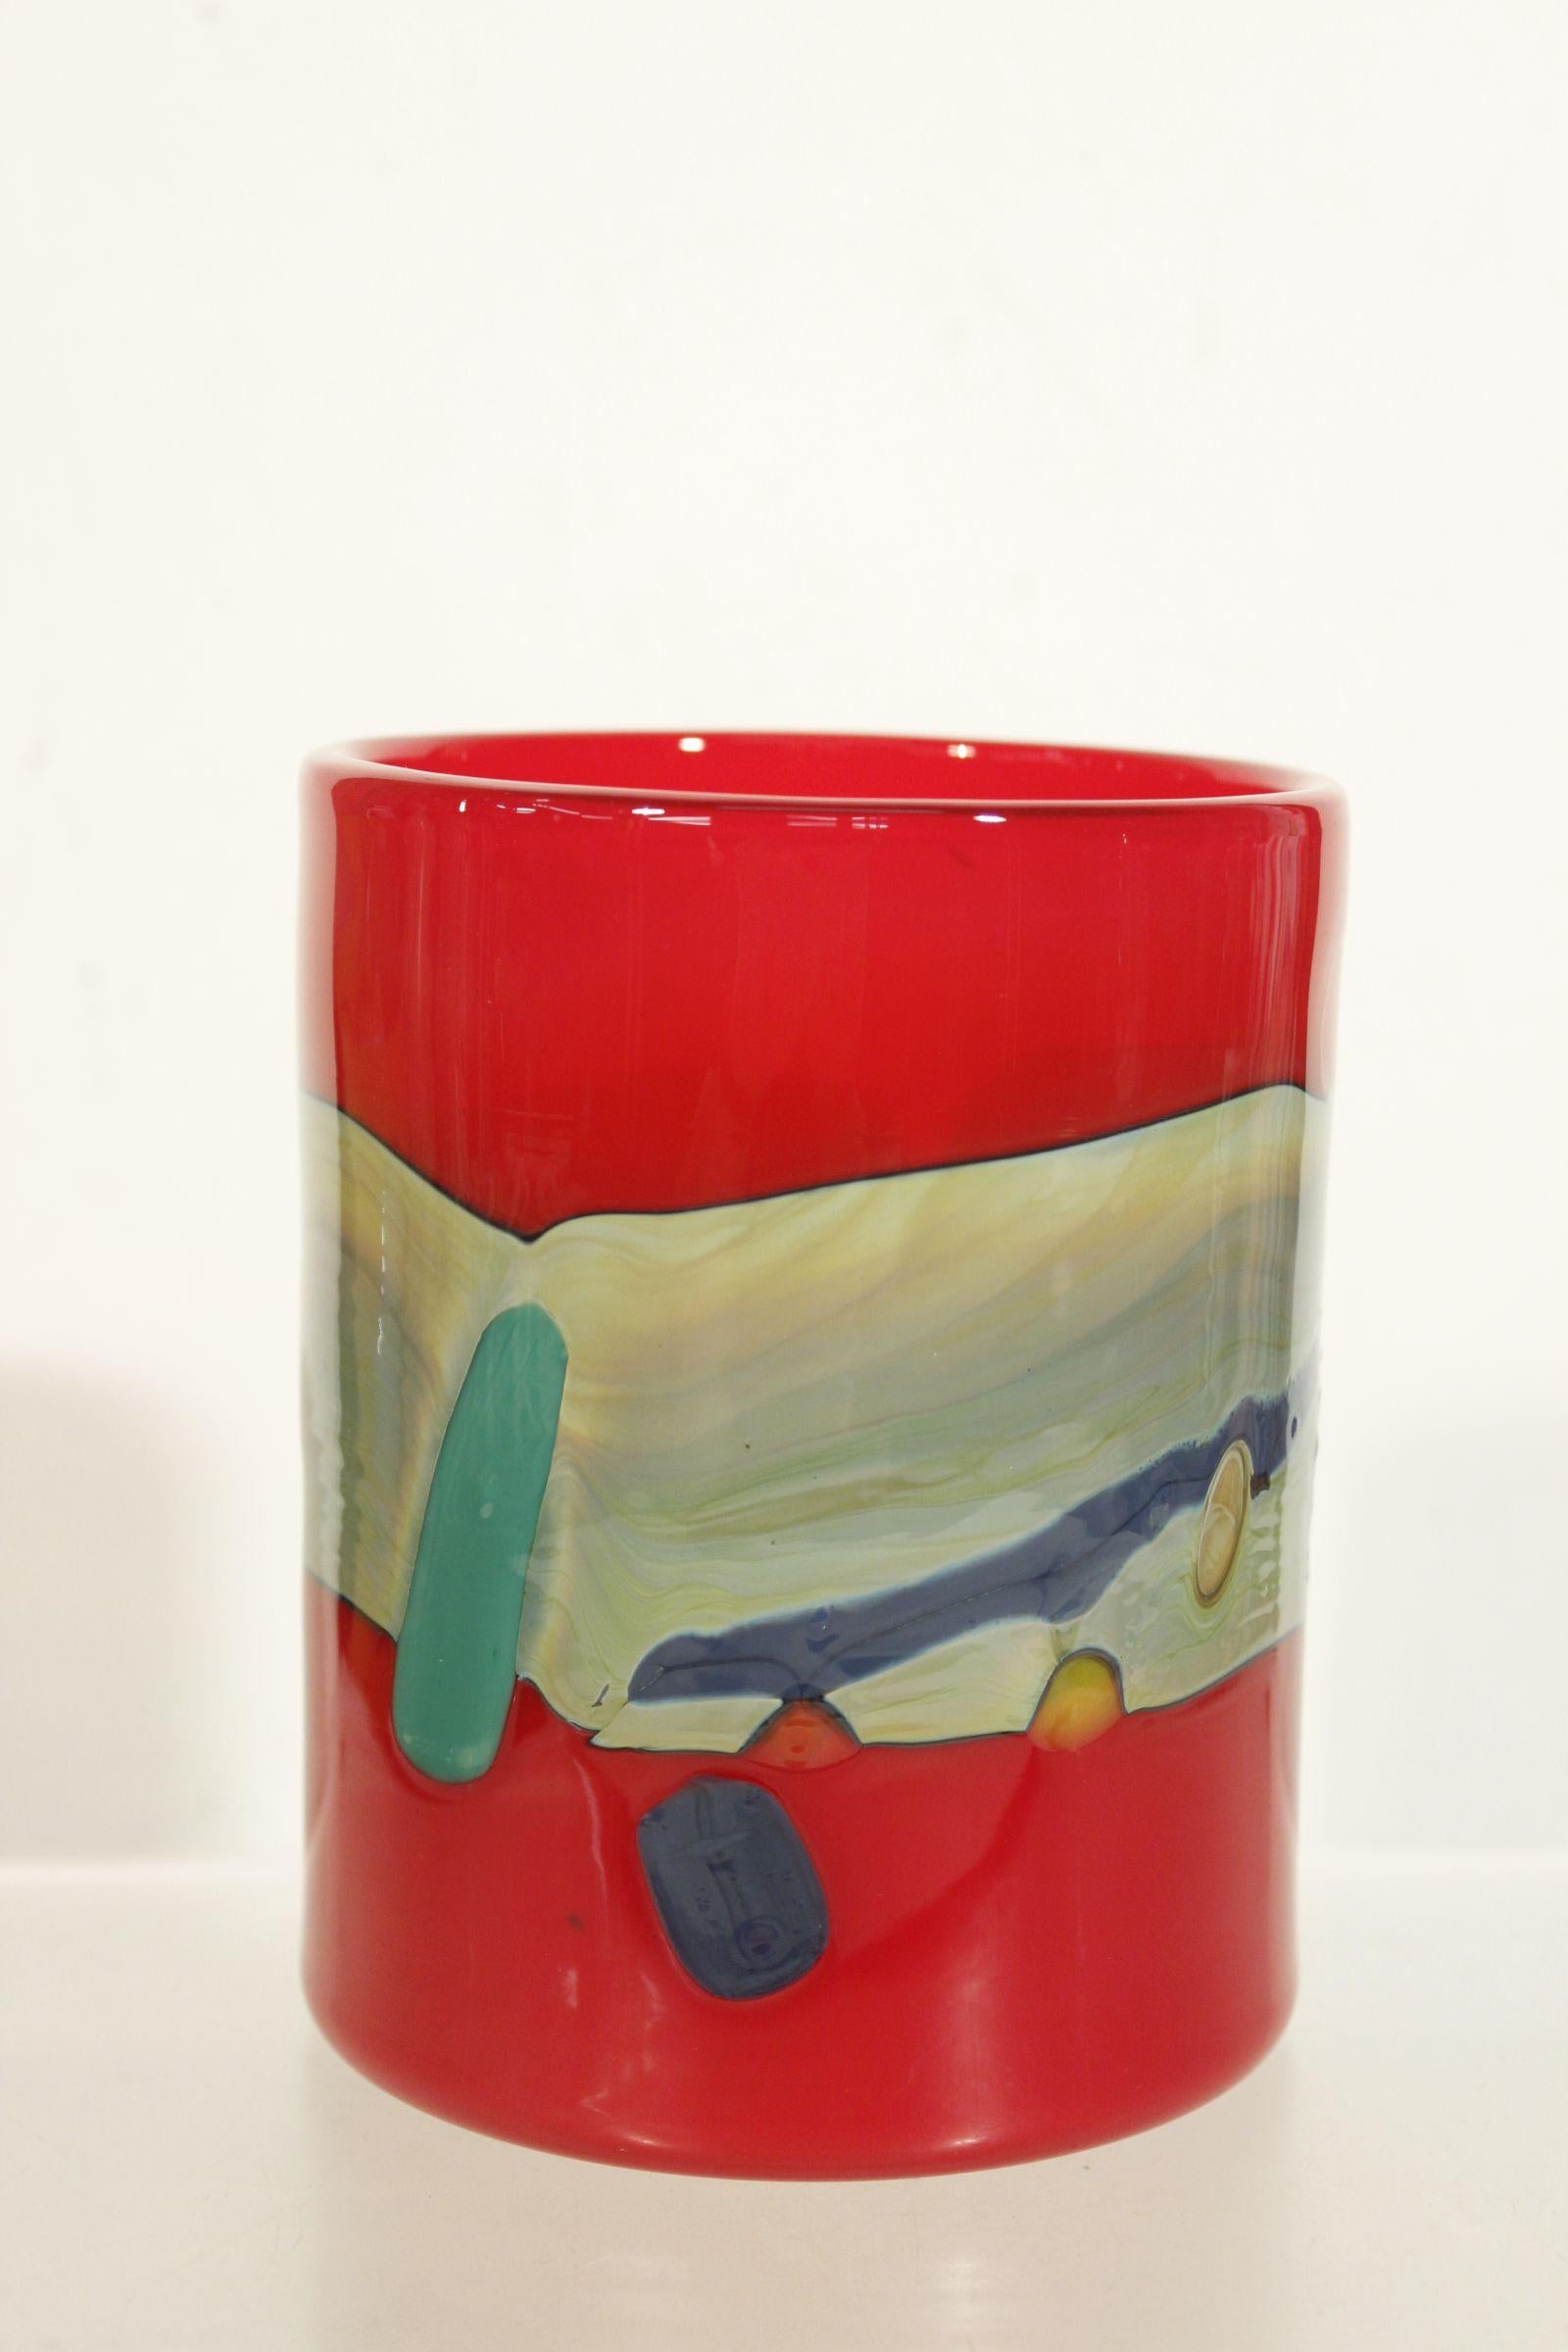 Vintage roller glass vase with abstract decor, rare piece by Kerttu Nurminen for Nuutajärvi Finland circa 1980

In great overall condition, no damage to be noted

